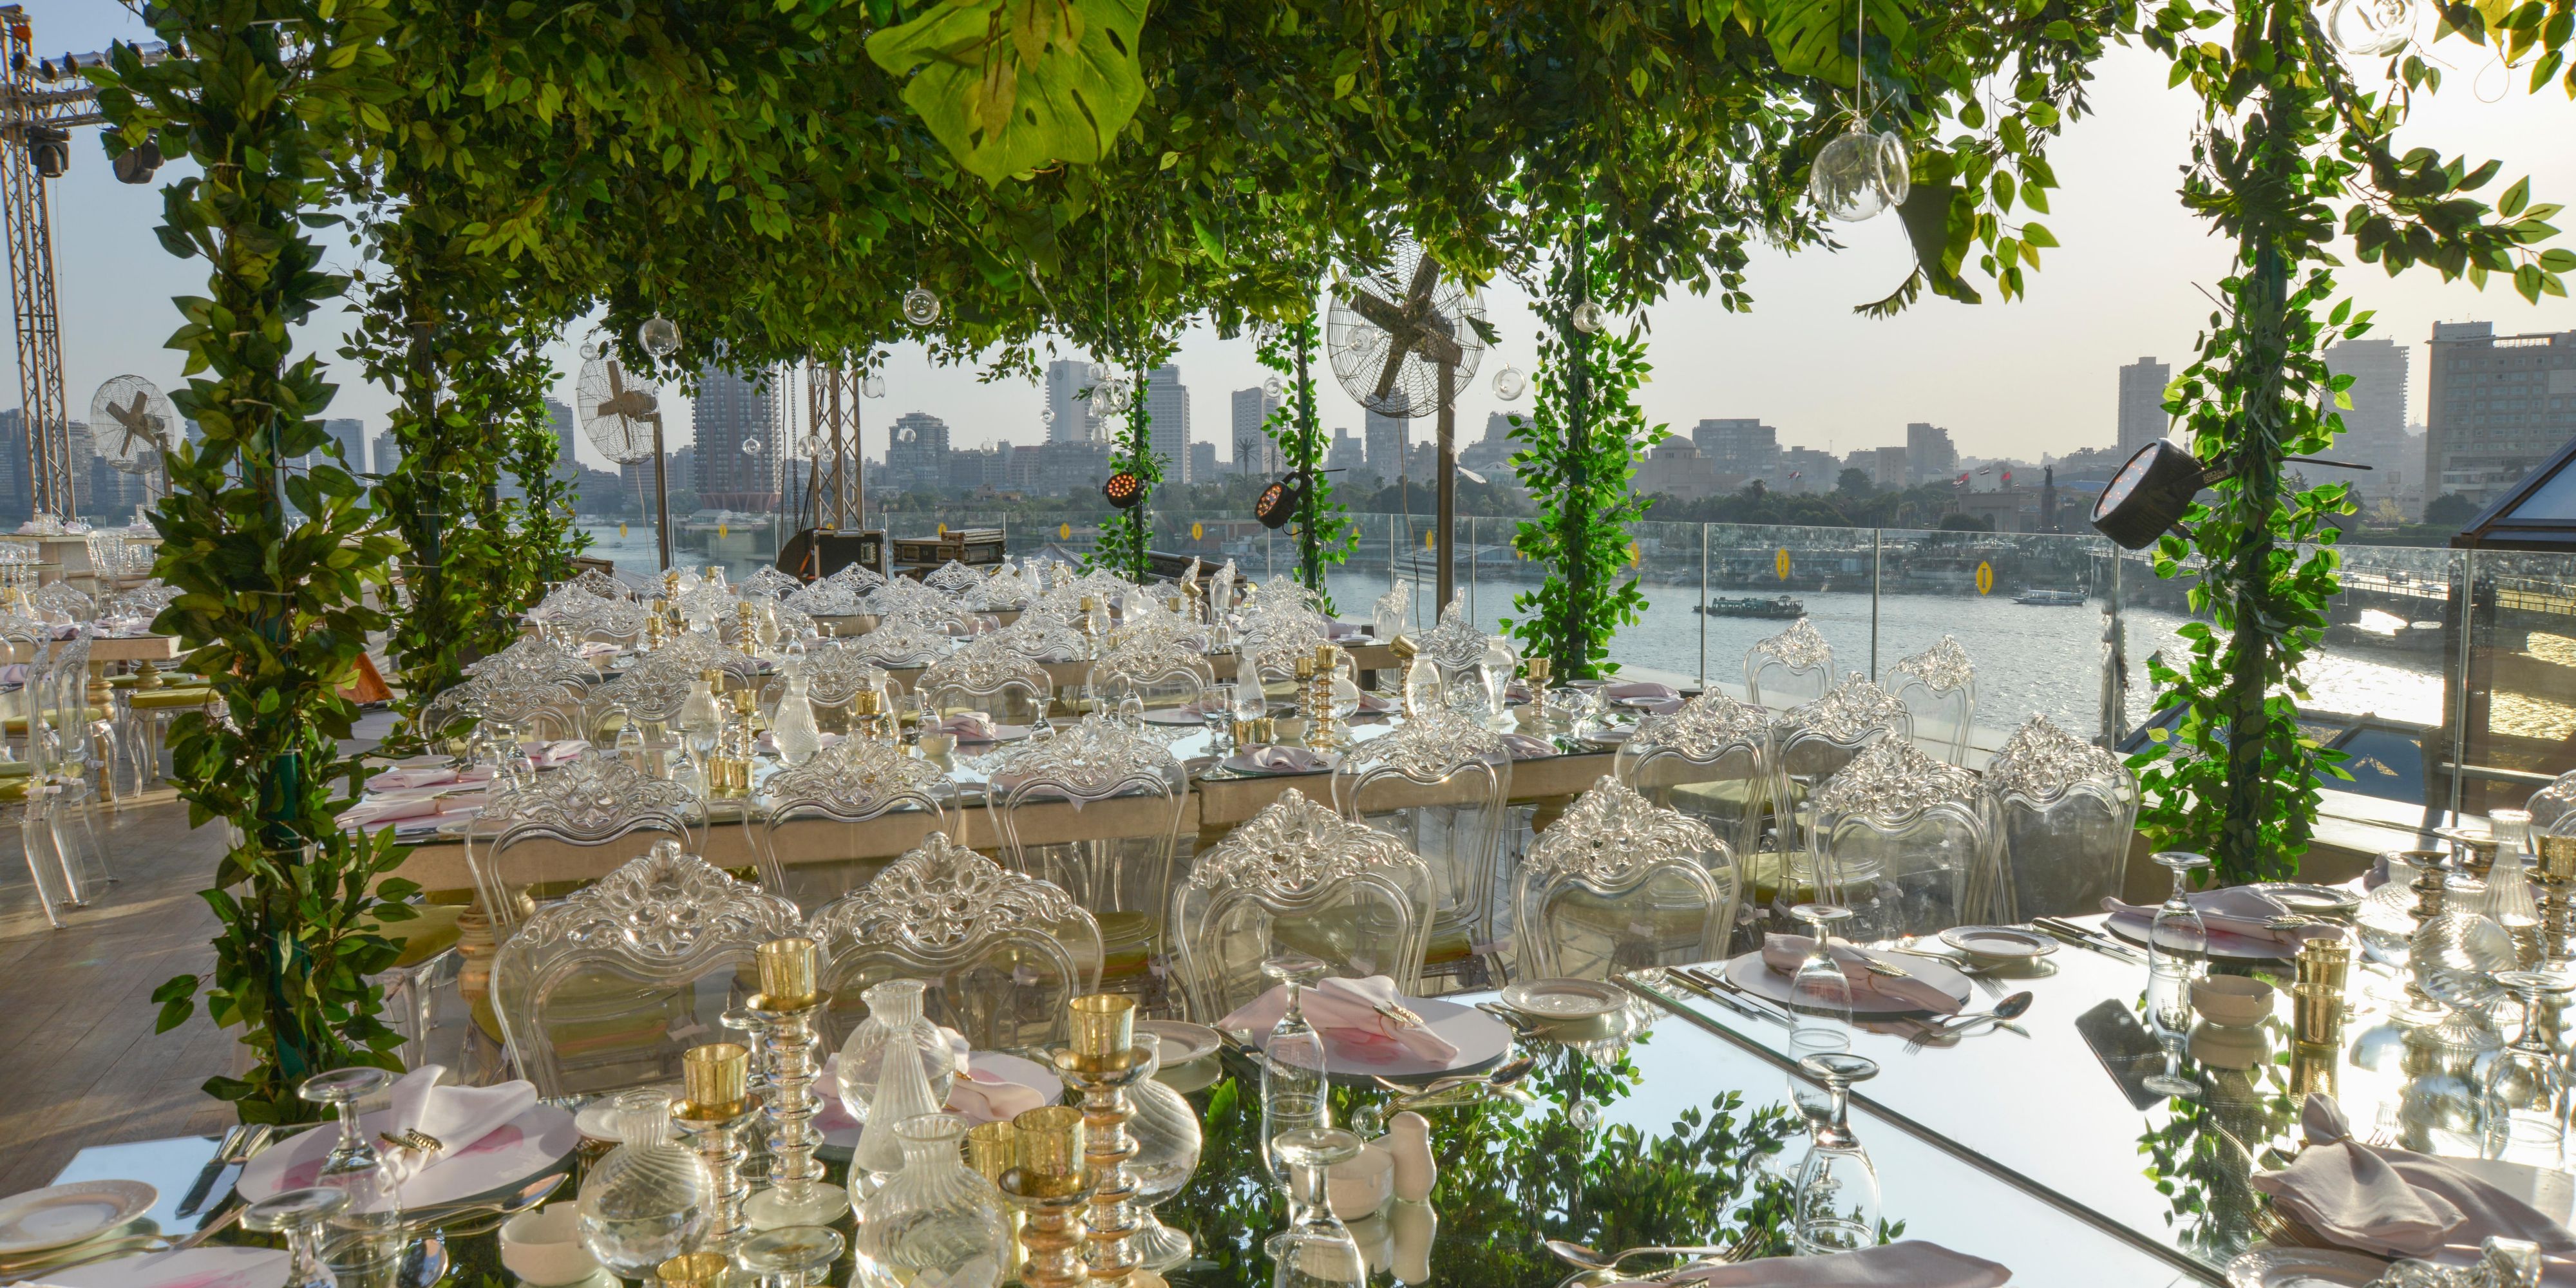 At Semiramis InterContinental Cairo, we draw on the heritage of the region in offering a number of entrancing wedding venues. The splendid setting of the new Cleopatra can host up to 1,200 guests for the grandest of occasions whilst Teeba, Nile Terrace and Pool Terrace offer stunning Nile views.